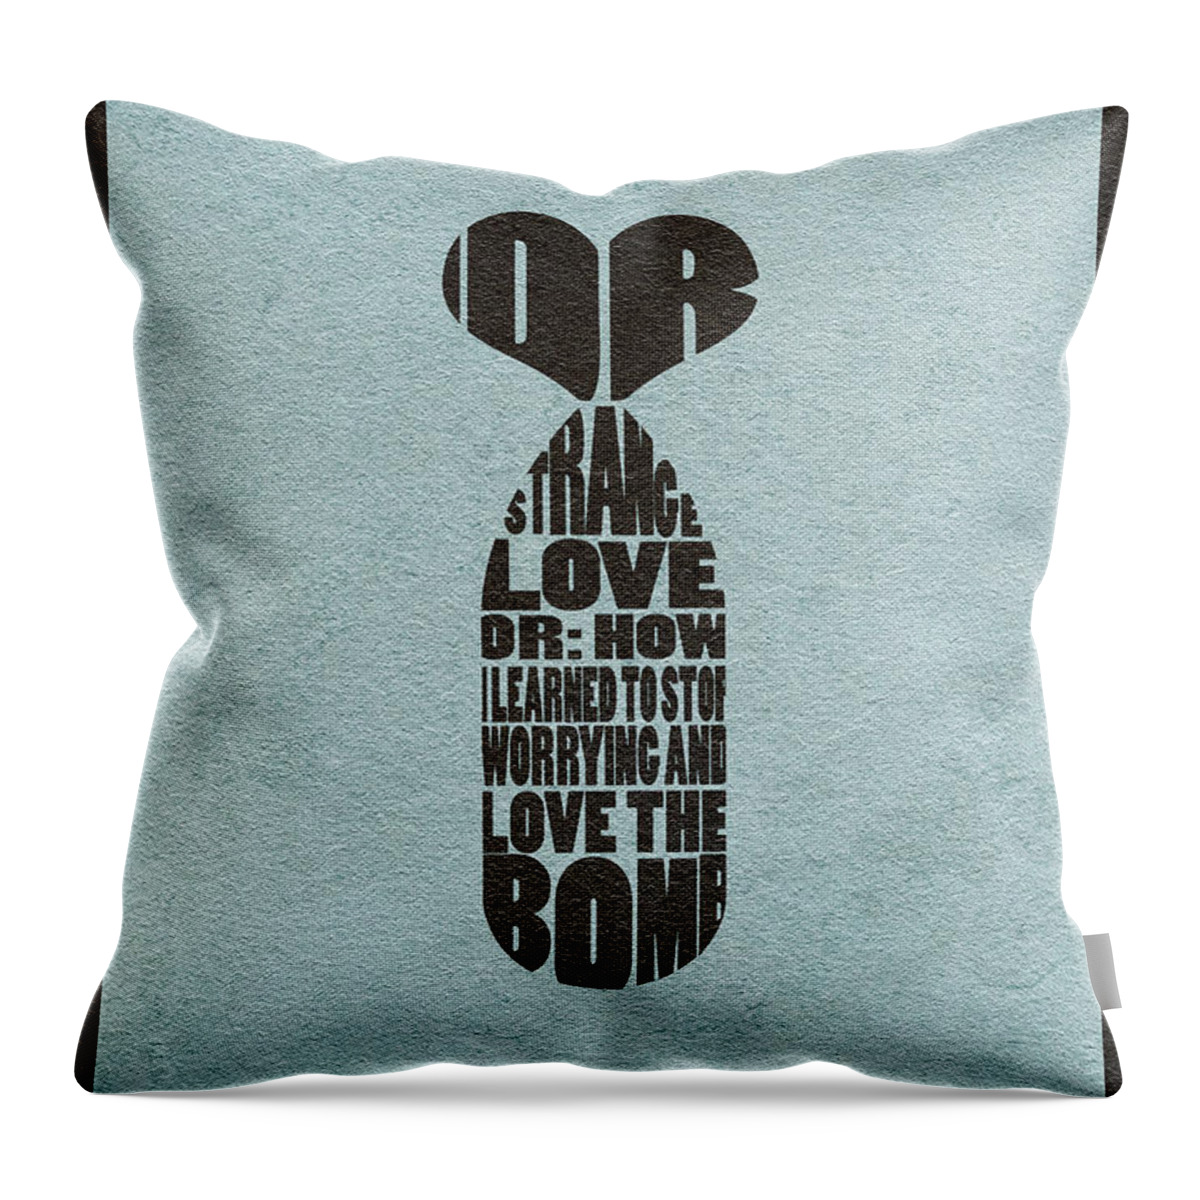 Dr. Strangelove Or: How I Learned To Stop Worrying And Love The Bomb Throw Pillow featuring the digital art Dr. Strangelove or How I Learned to Stop Worrying and Love the Bomb by Inspirowl Design